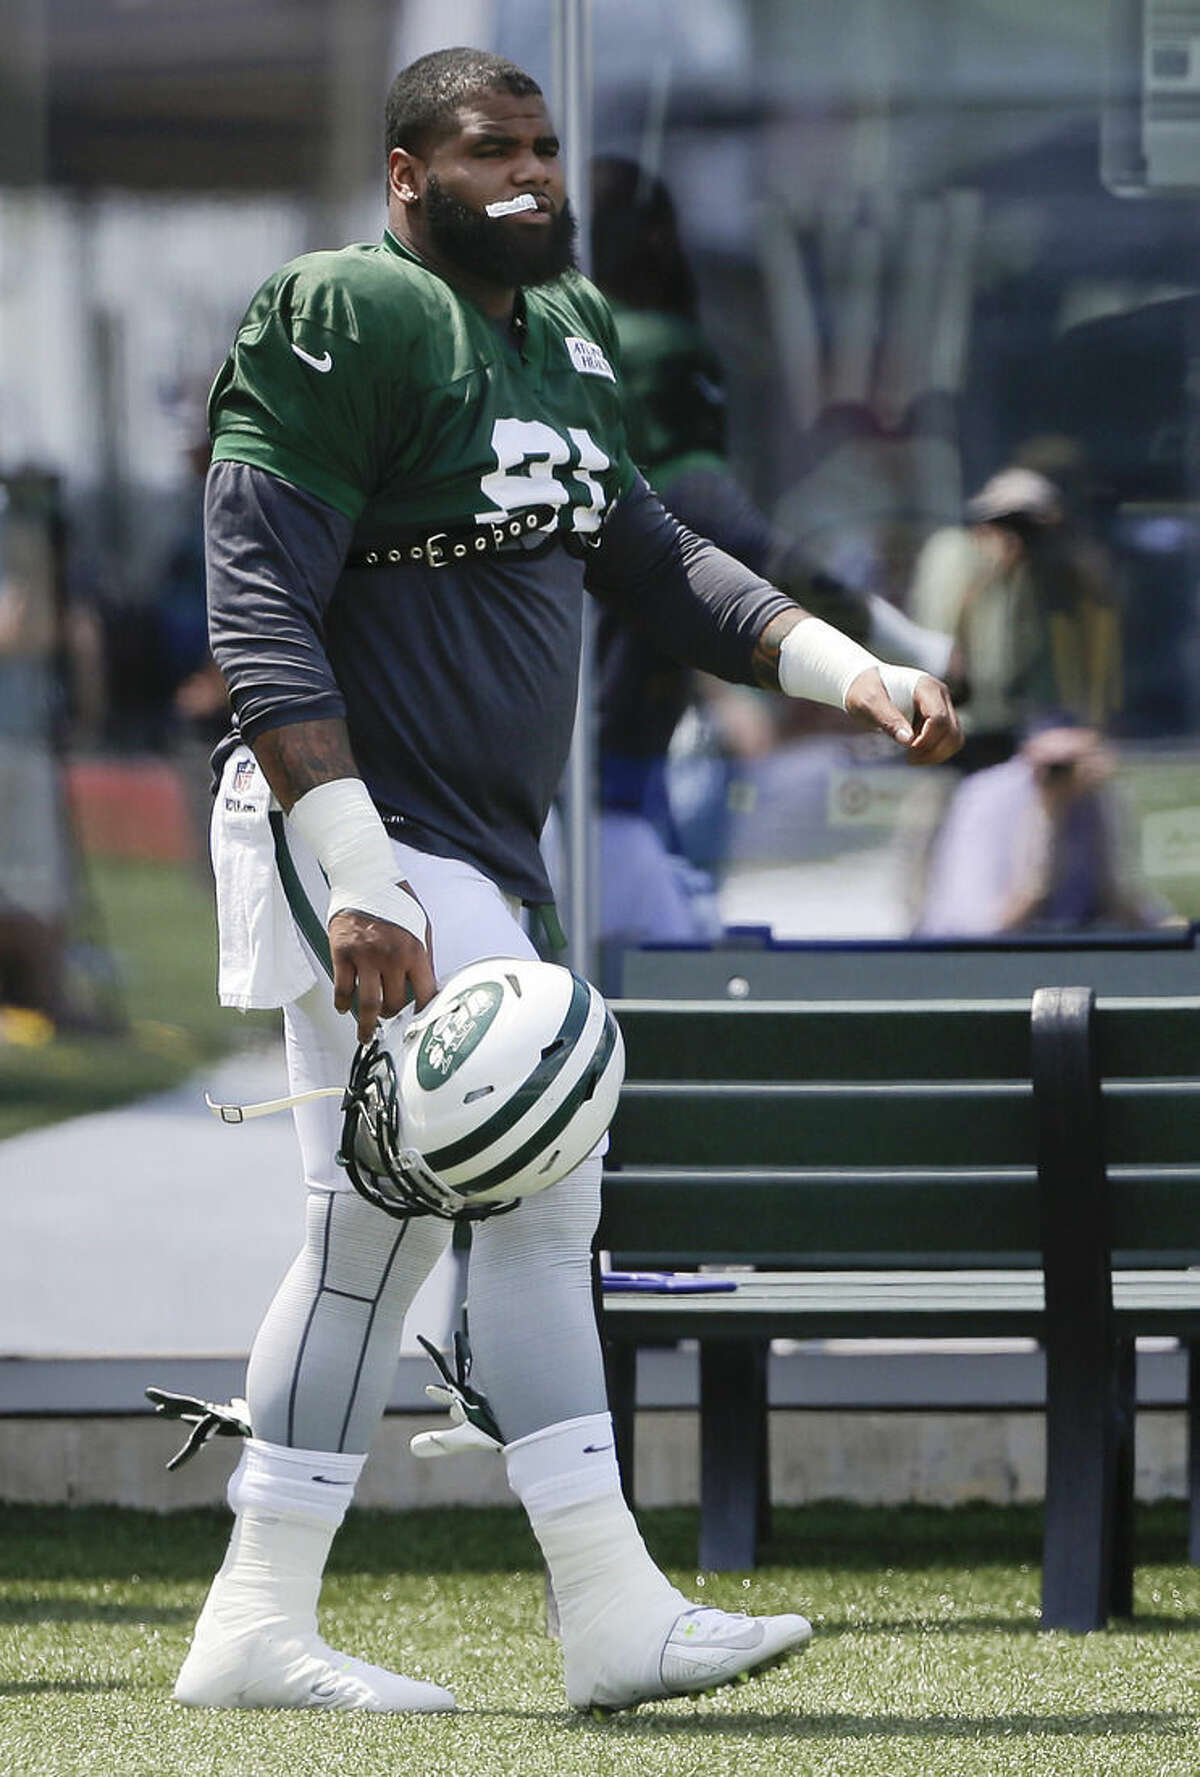 New York Jets defensive end Sheldon Richardson walks out to the practice field before the start of training camp at the Jets' NFL football training camp, Saturday, Aug. 1, 2015, in Florham Park, N.J.. (AP Photo/Julie Jacobson)